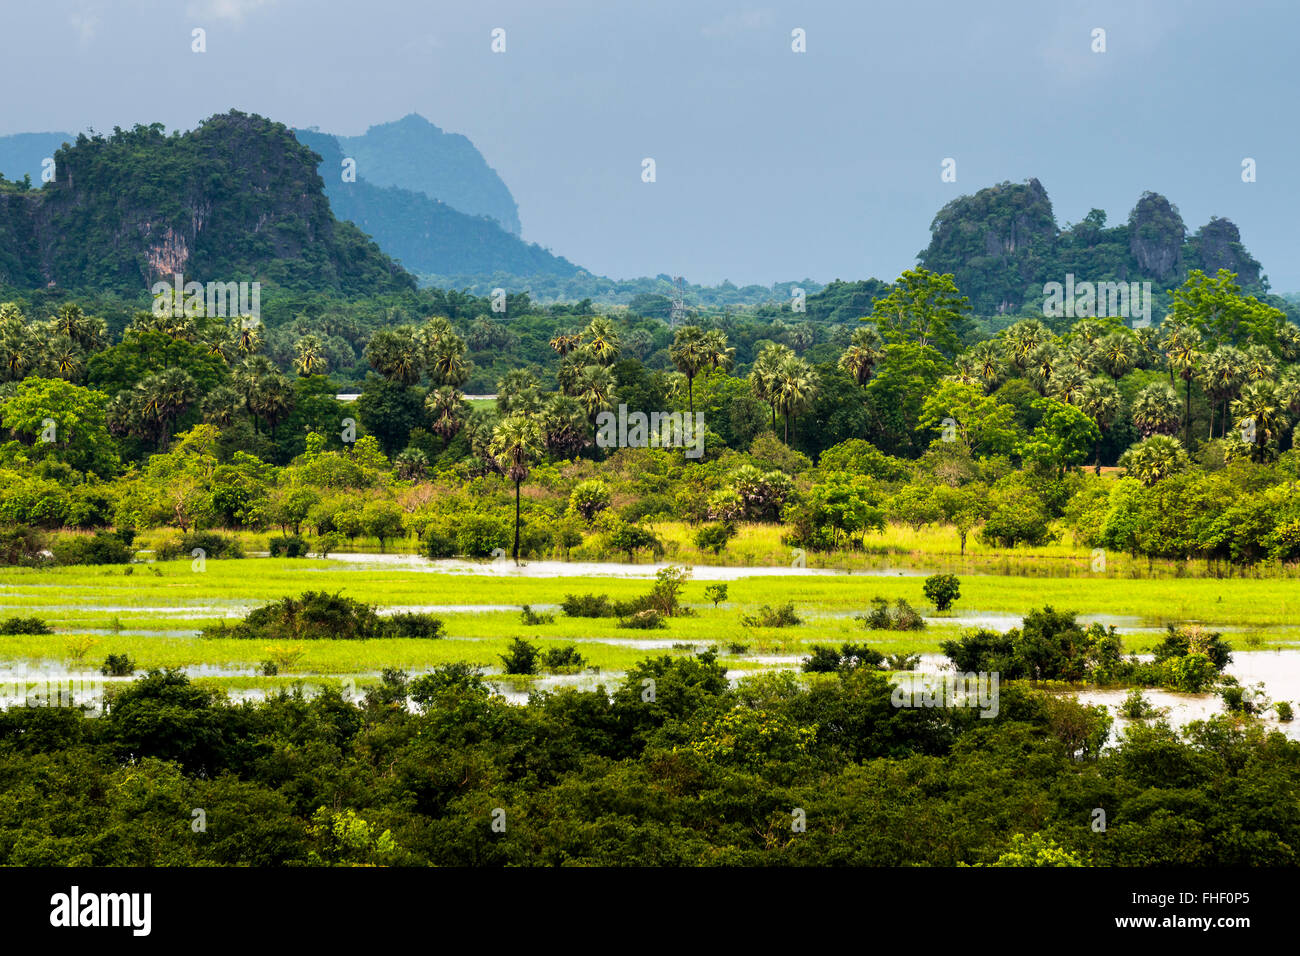 Stormy atmosphere at karst hills, view of the landscape, near Hpa-an, Karen or Kayin State, Myanmar, Burma Stock Photo